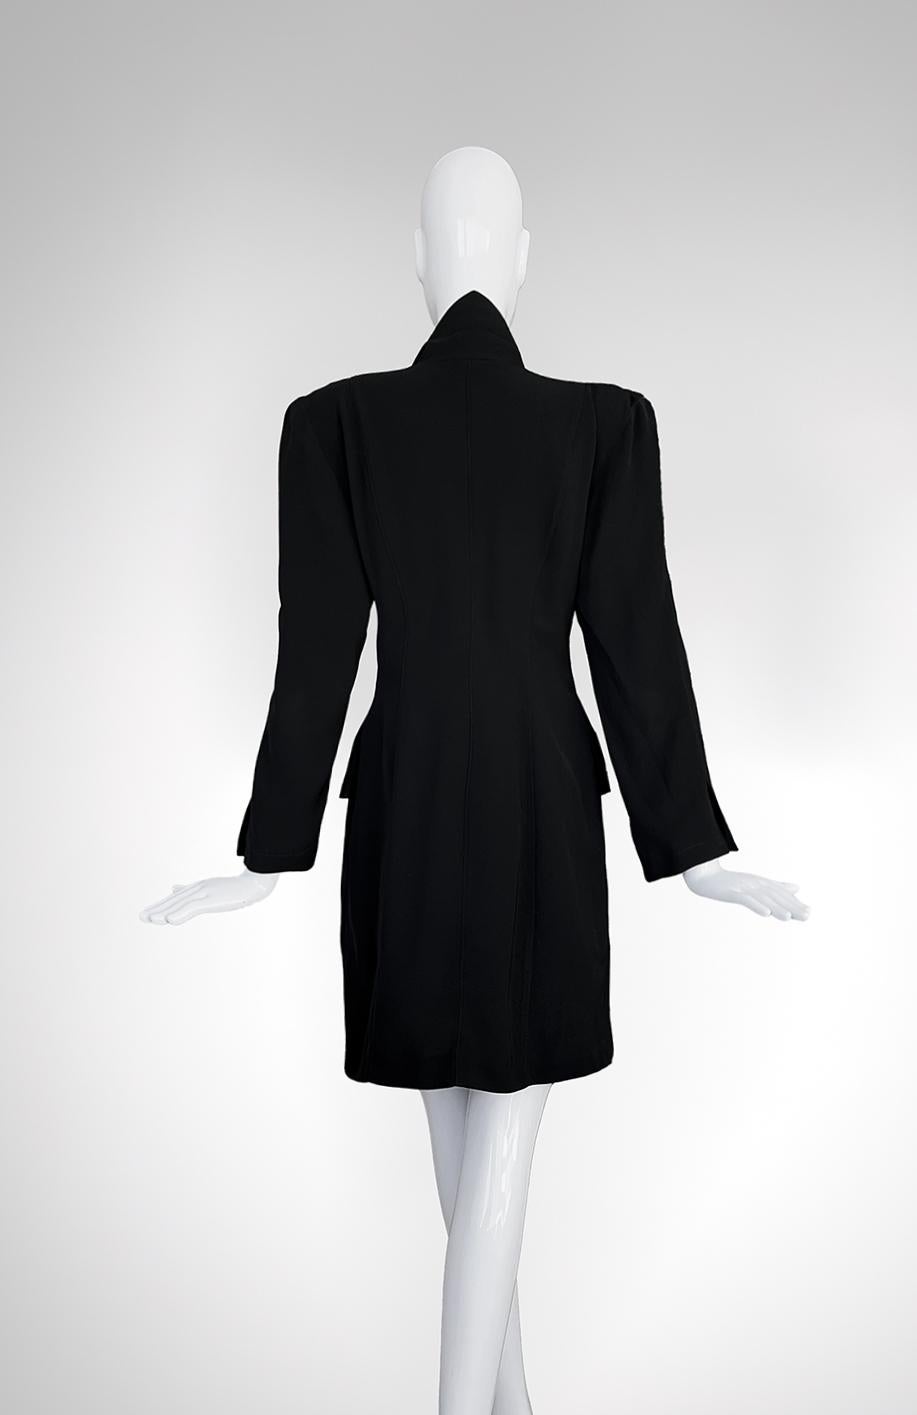 Thierry Mugler Black Jacket Dramatic Collar Coat For Sale 4